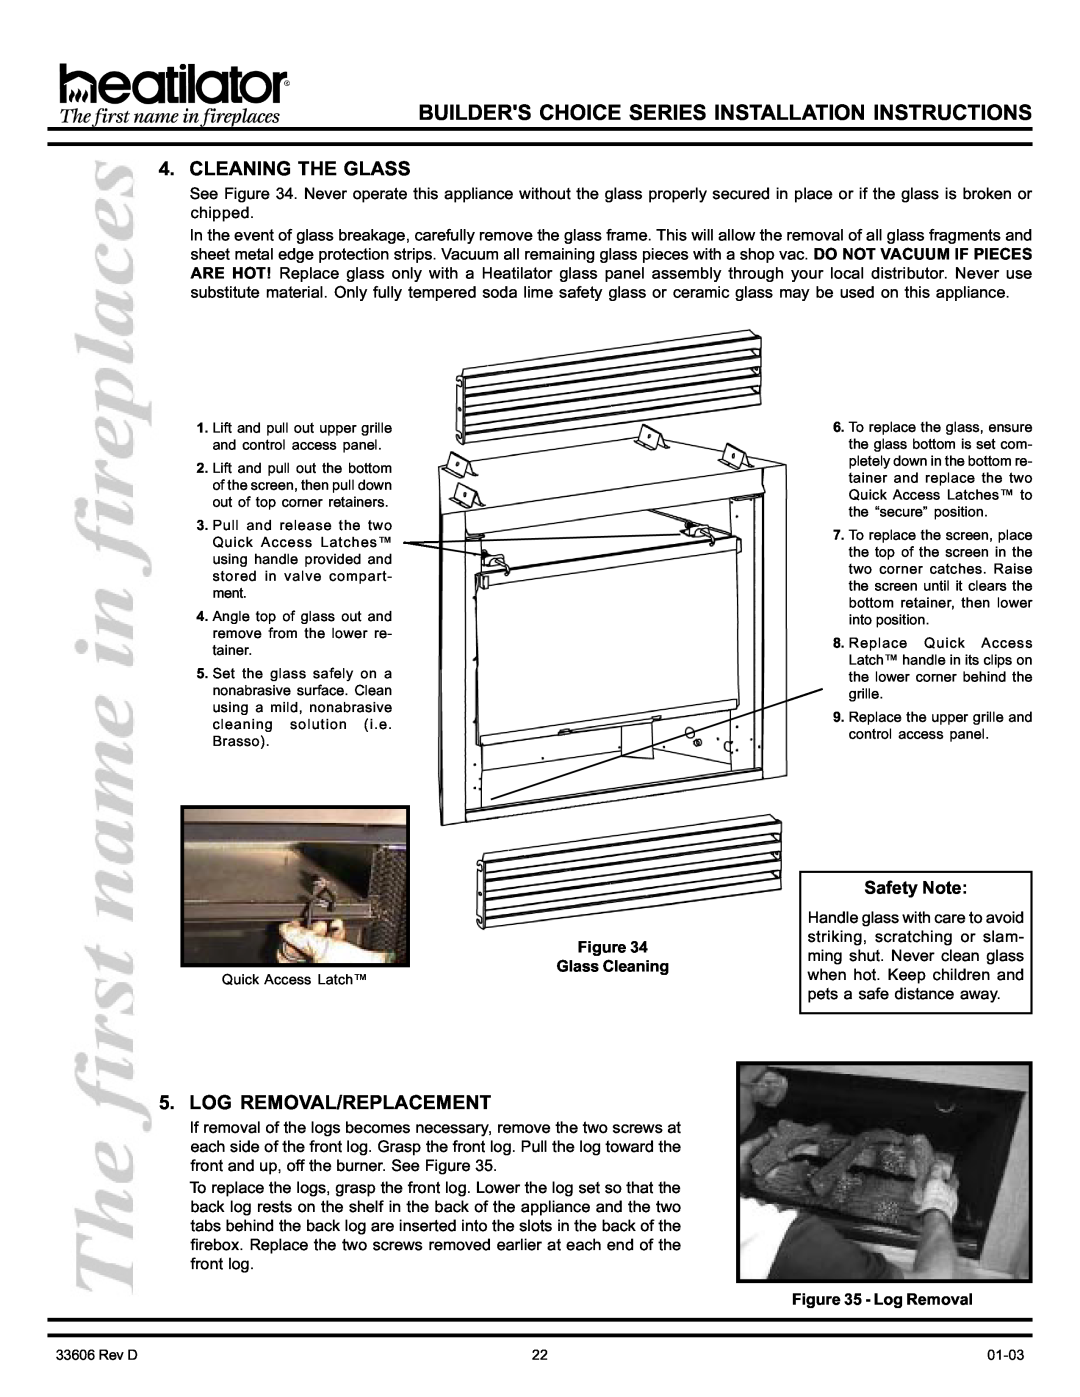 Heatiator BCDV36 manual Cleaning The Glass, Log Removal/Replacement, Safety Note, Figure Glass Cleaning 